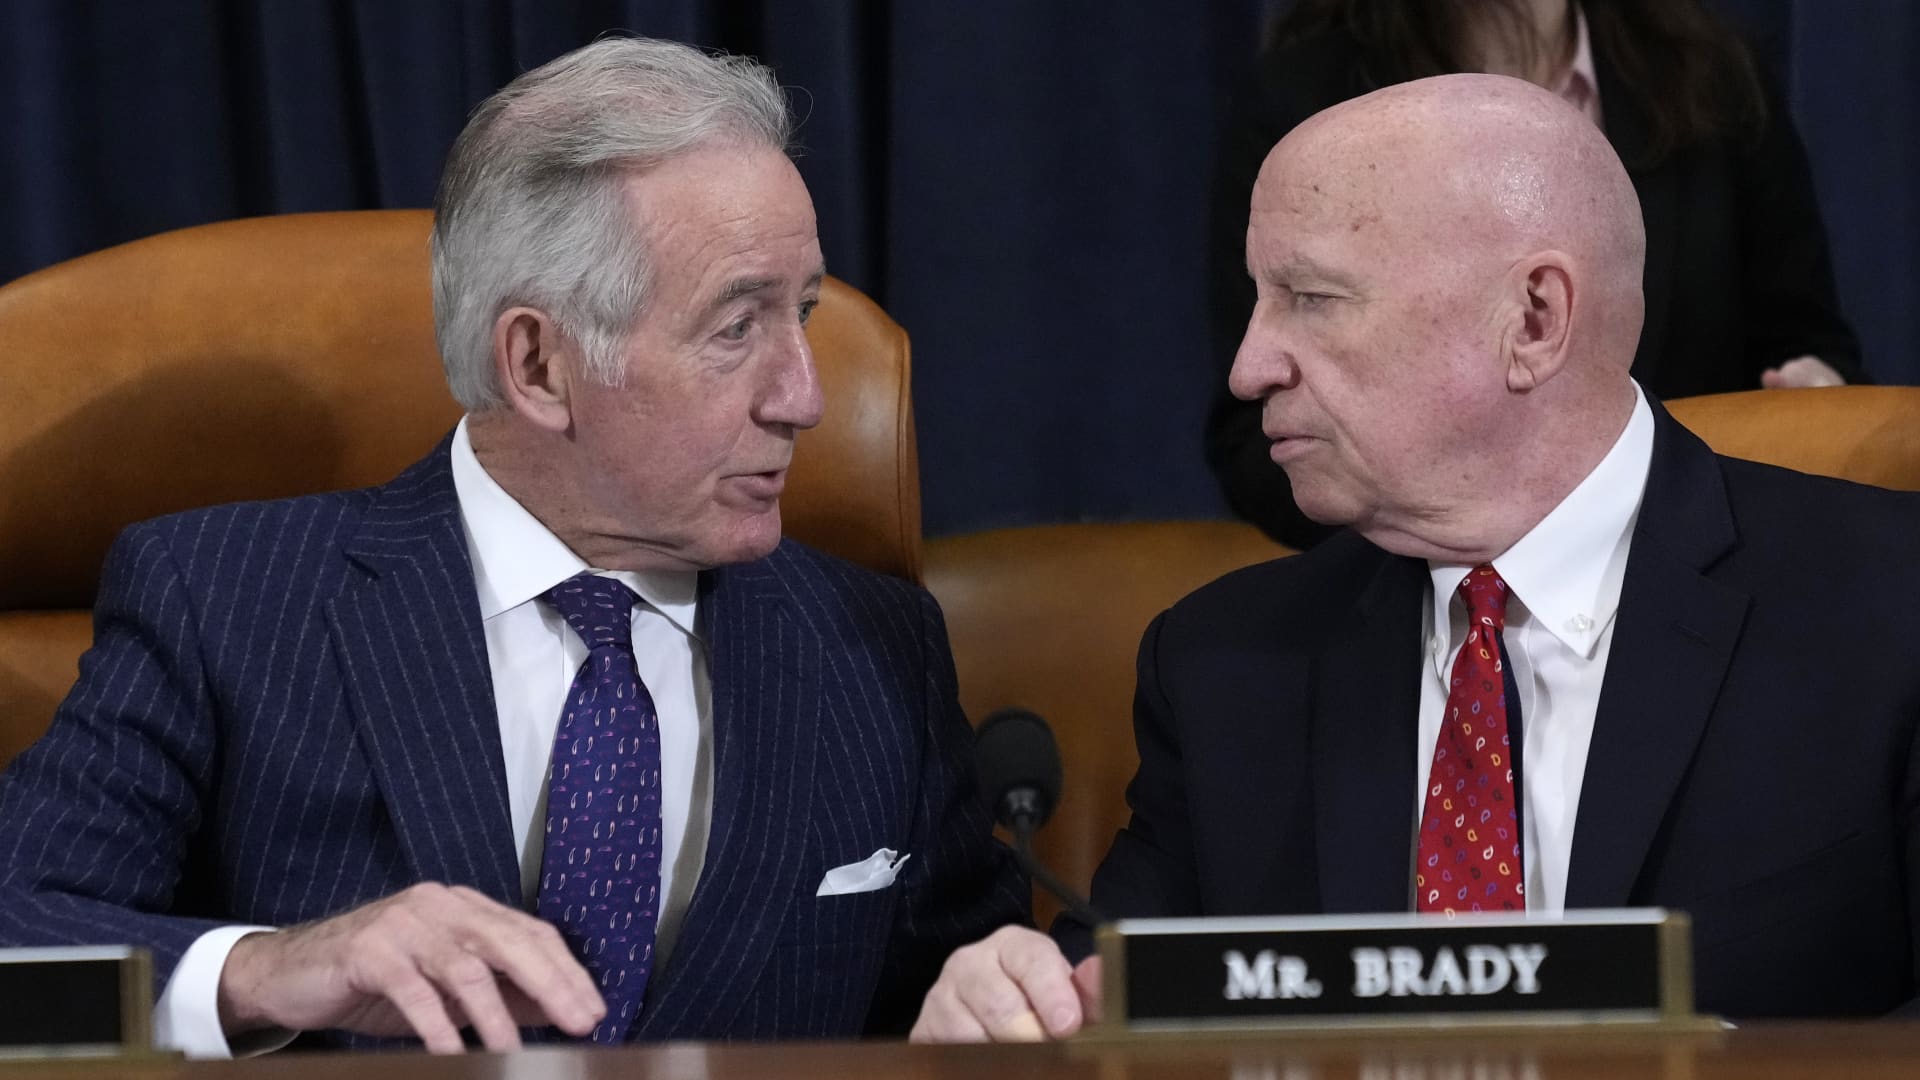 Committee chairman Rep. Richard Neal (D-MA) and ranking member Rep. Kevin Brady (R-TX) talk during a business meeting of the House Ways and Means Committee on Capitol Hill on December 20, 2022 in Washington, DC.